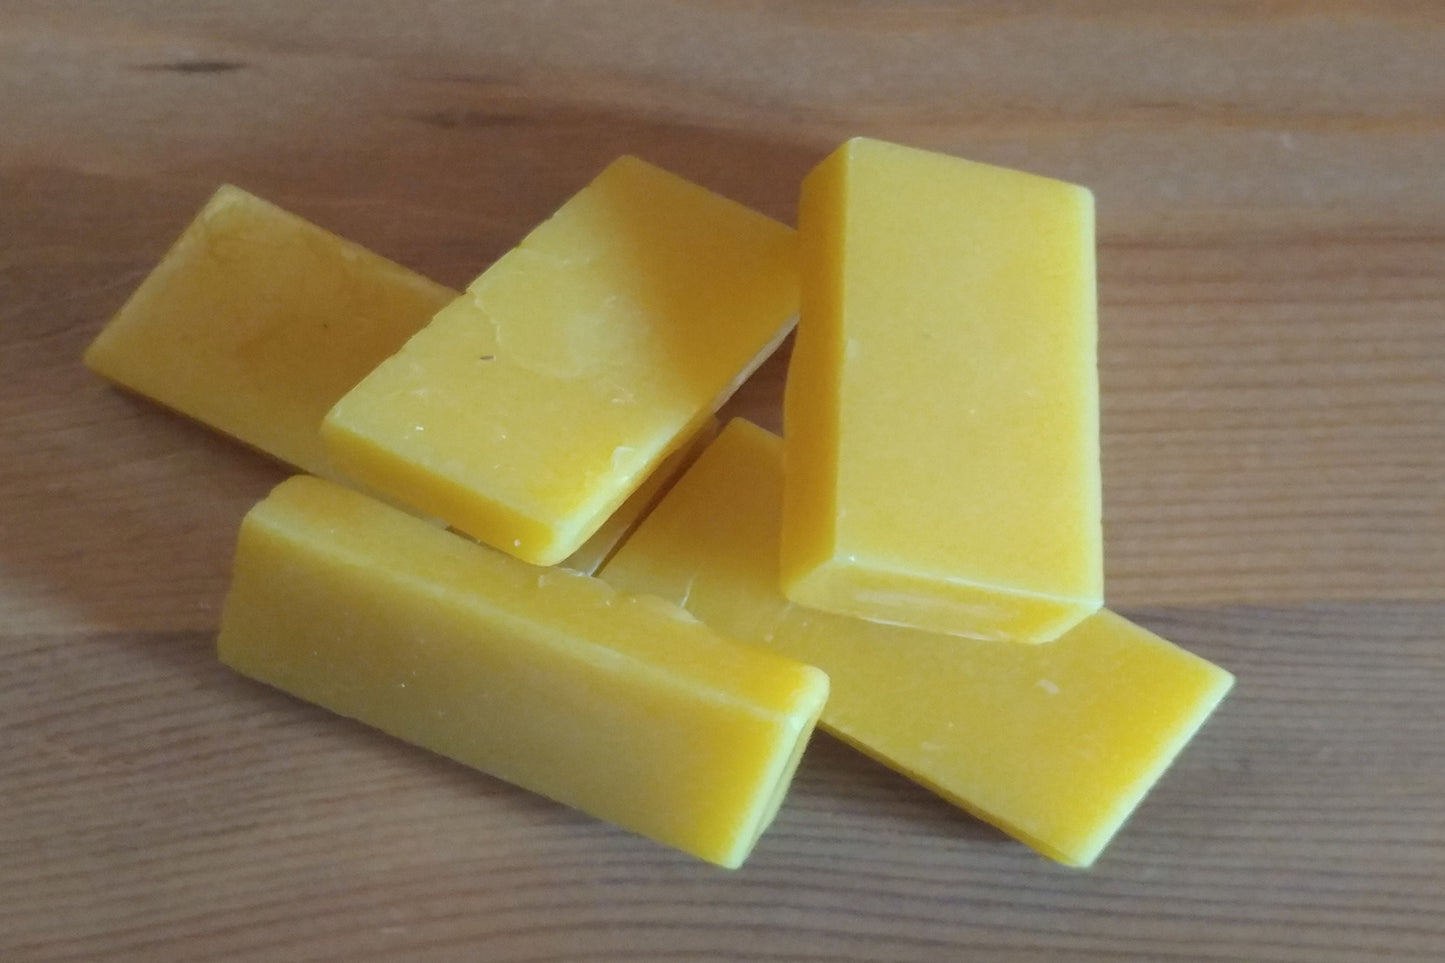 Crafter-Sized Beeswax Pieces